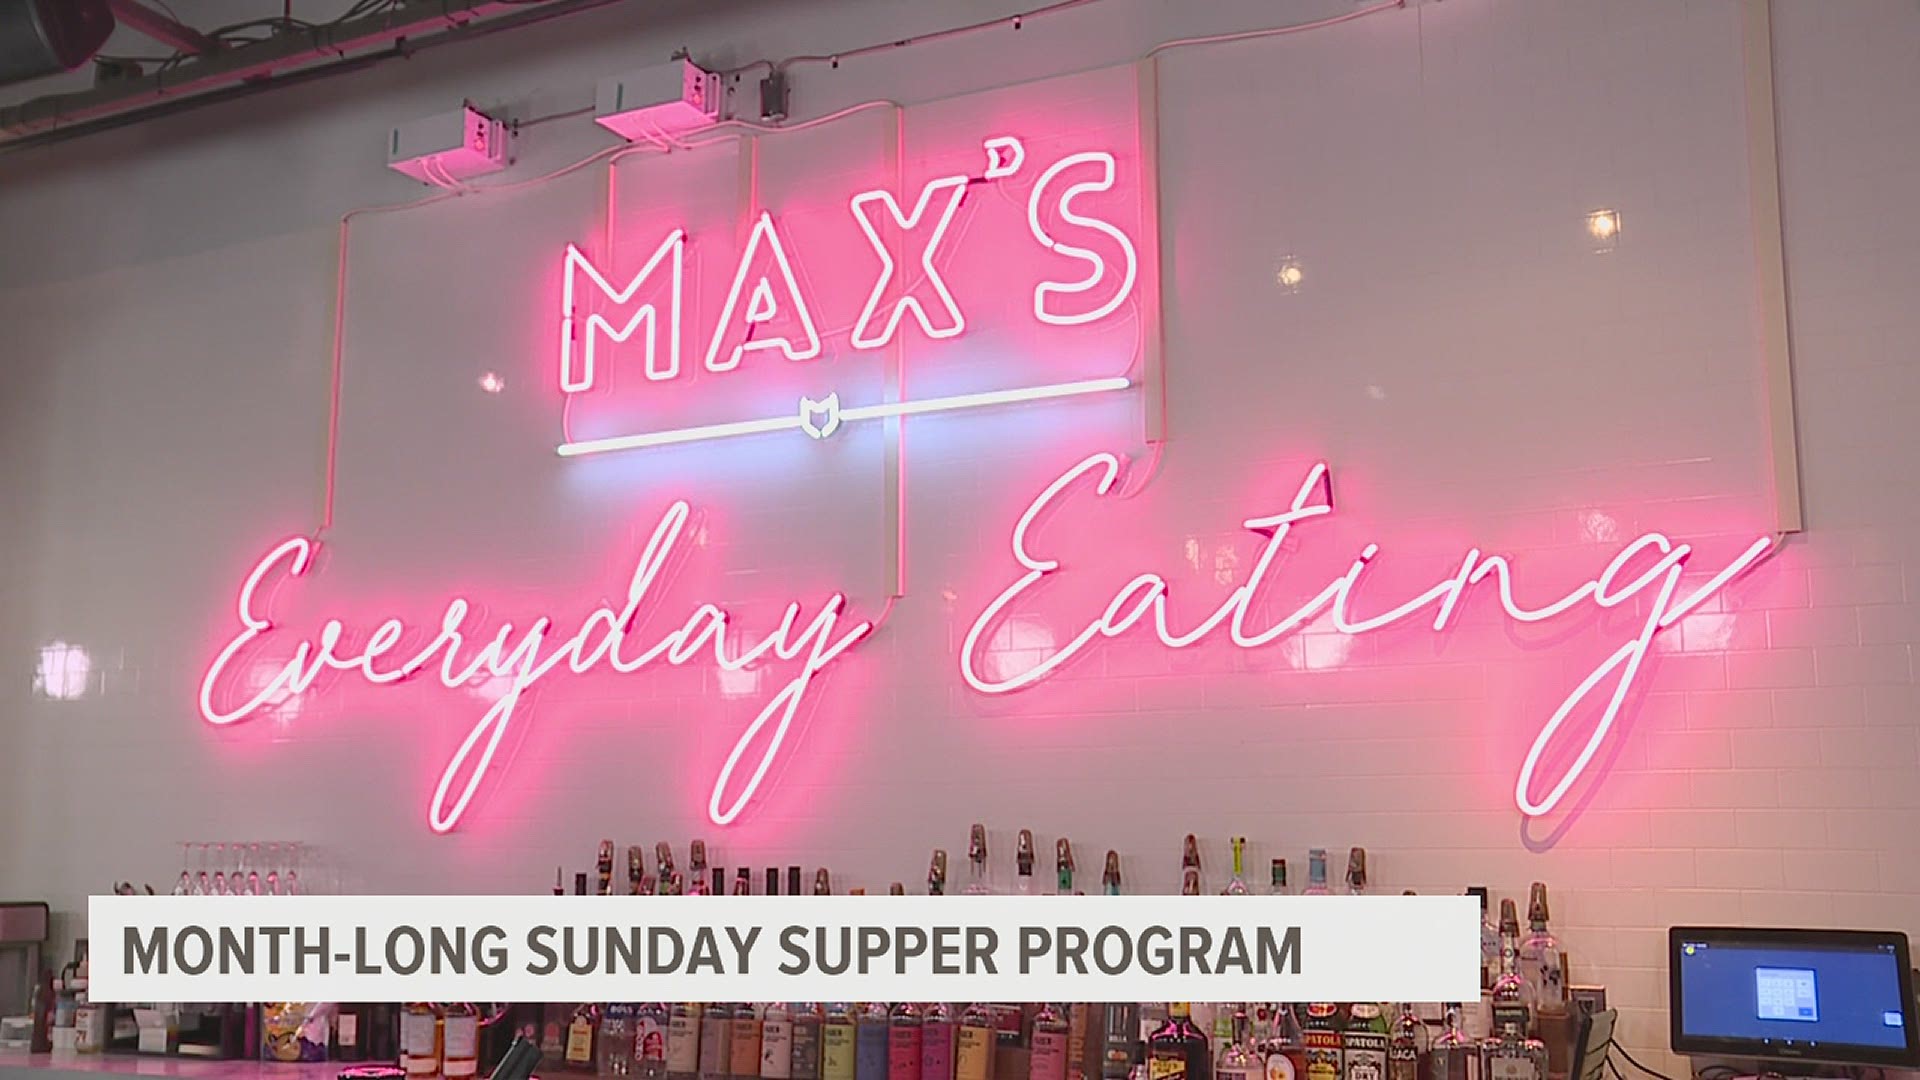 Max's Eatery and Lancaster Recreation Center kicks off month long supper program.